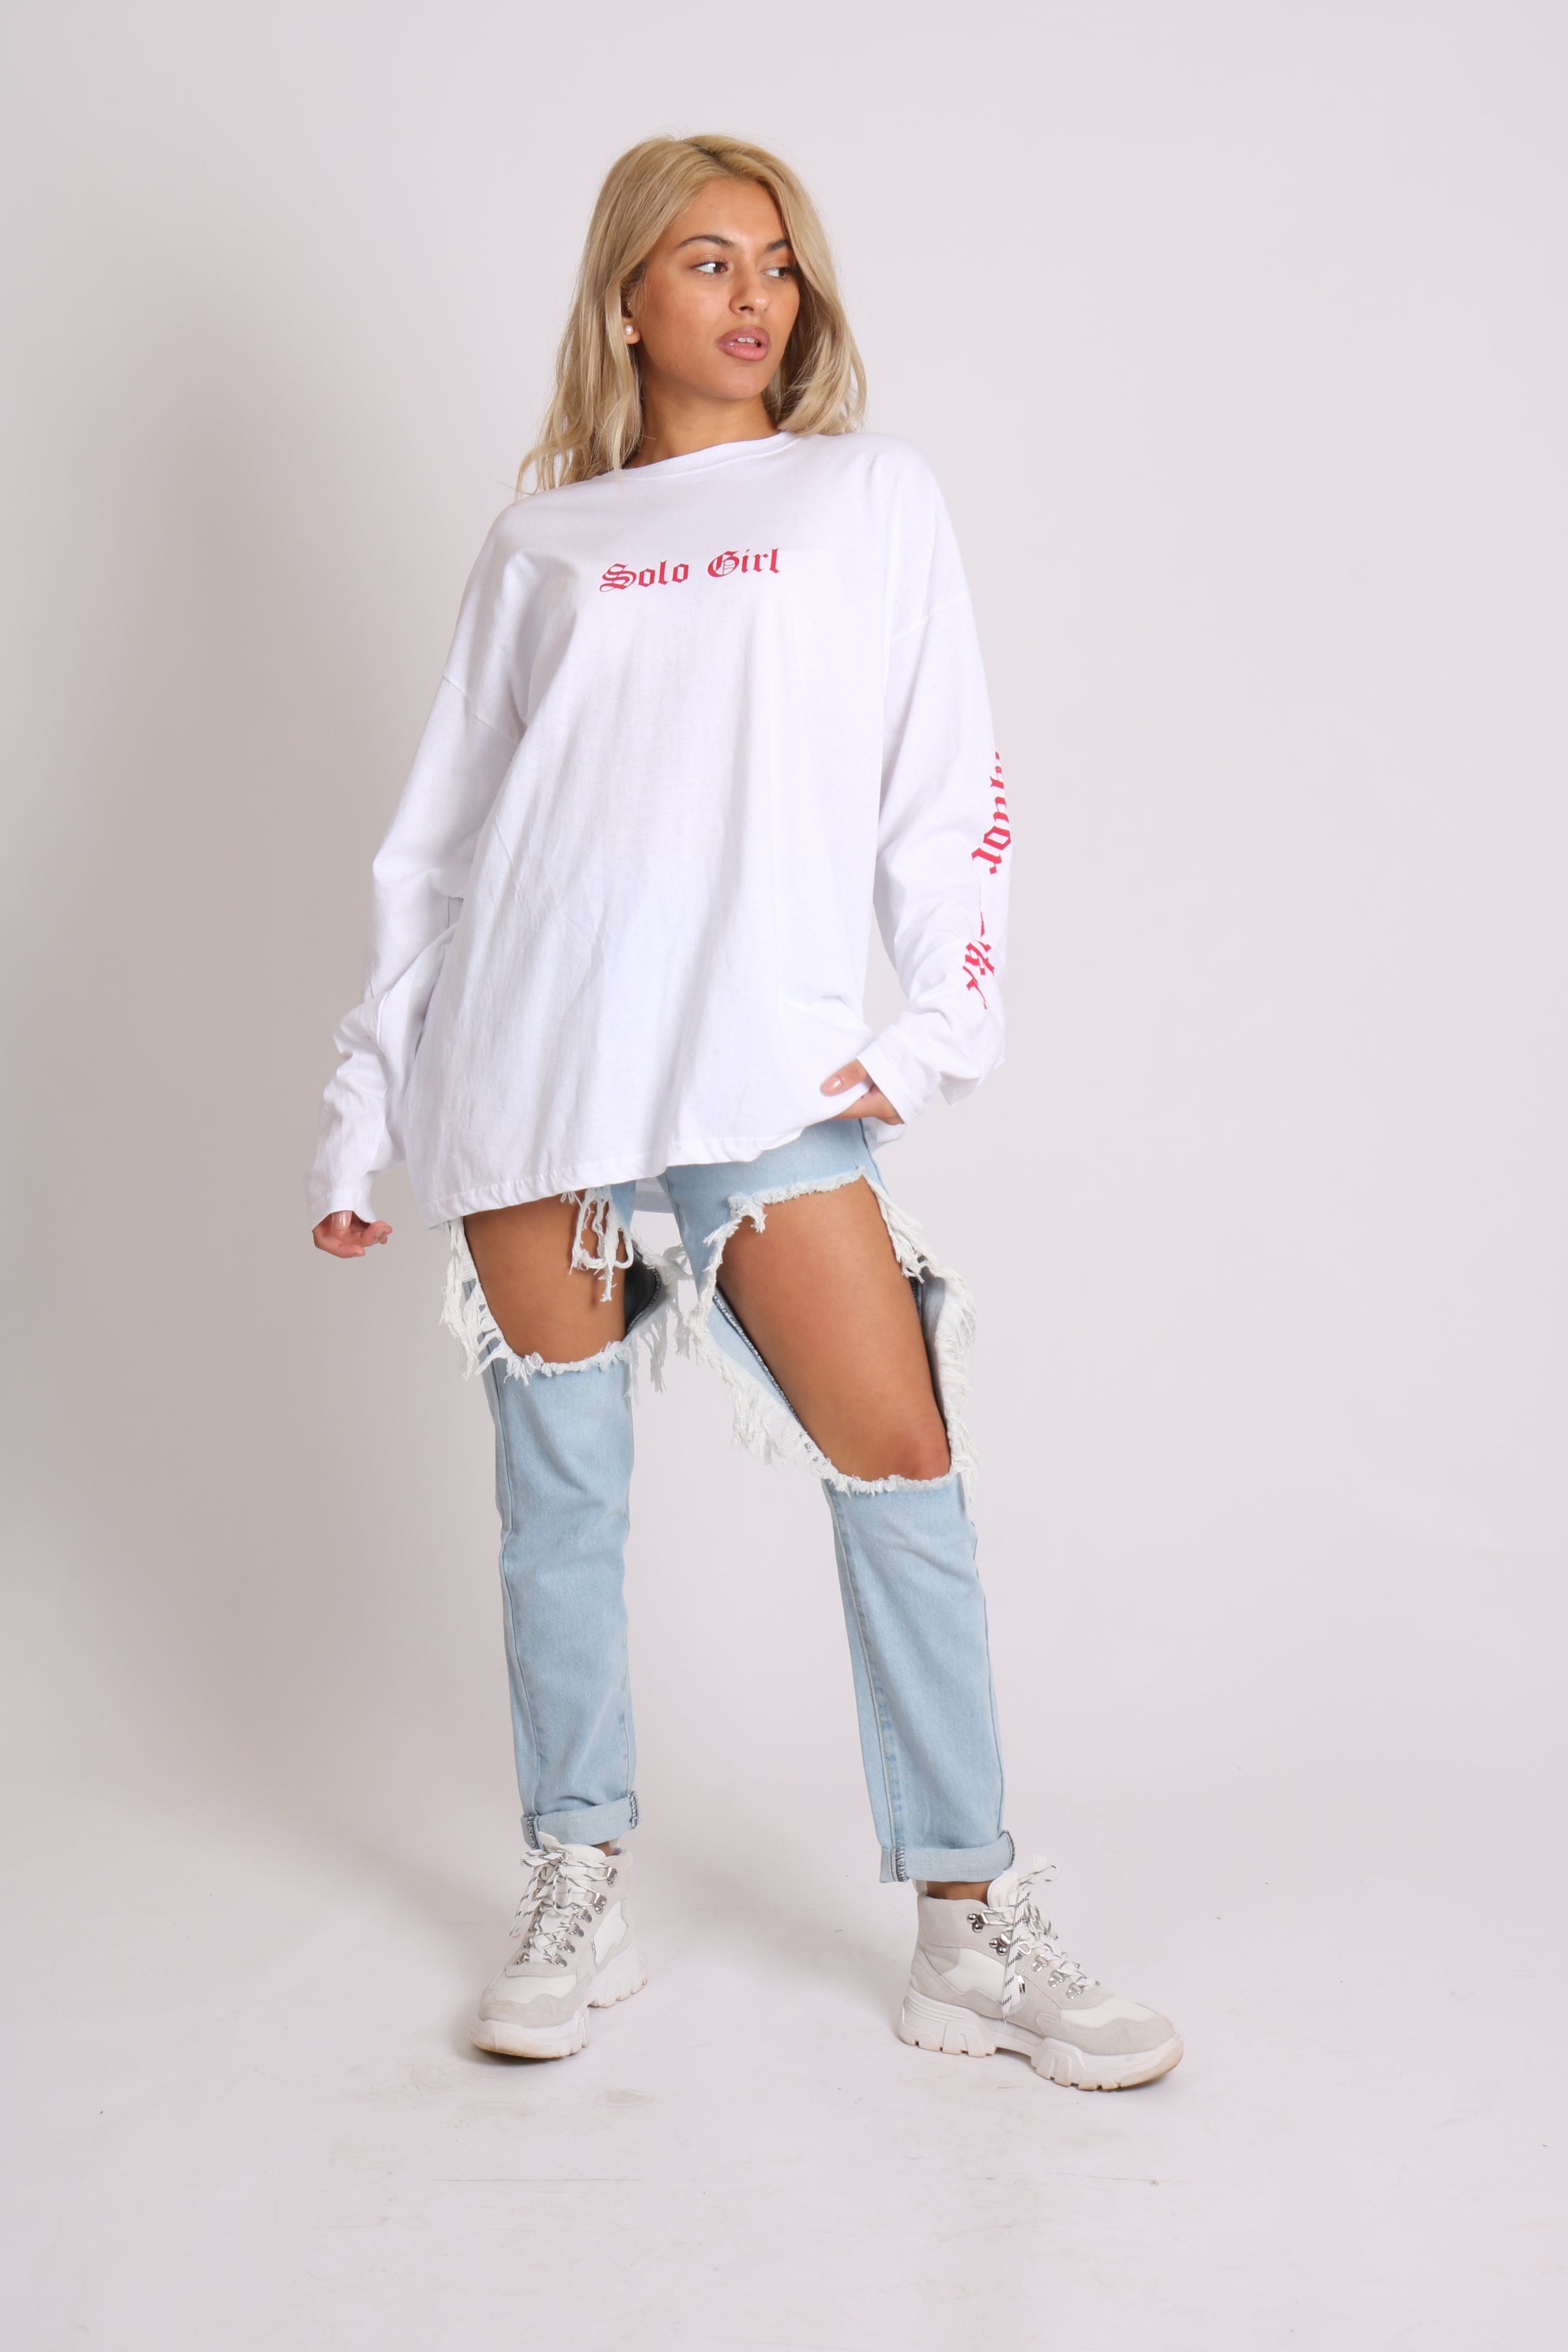 Solo Girl Long Sleeve T-Shirt With Safari Print In White